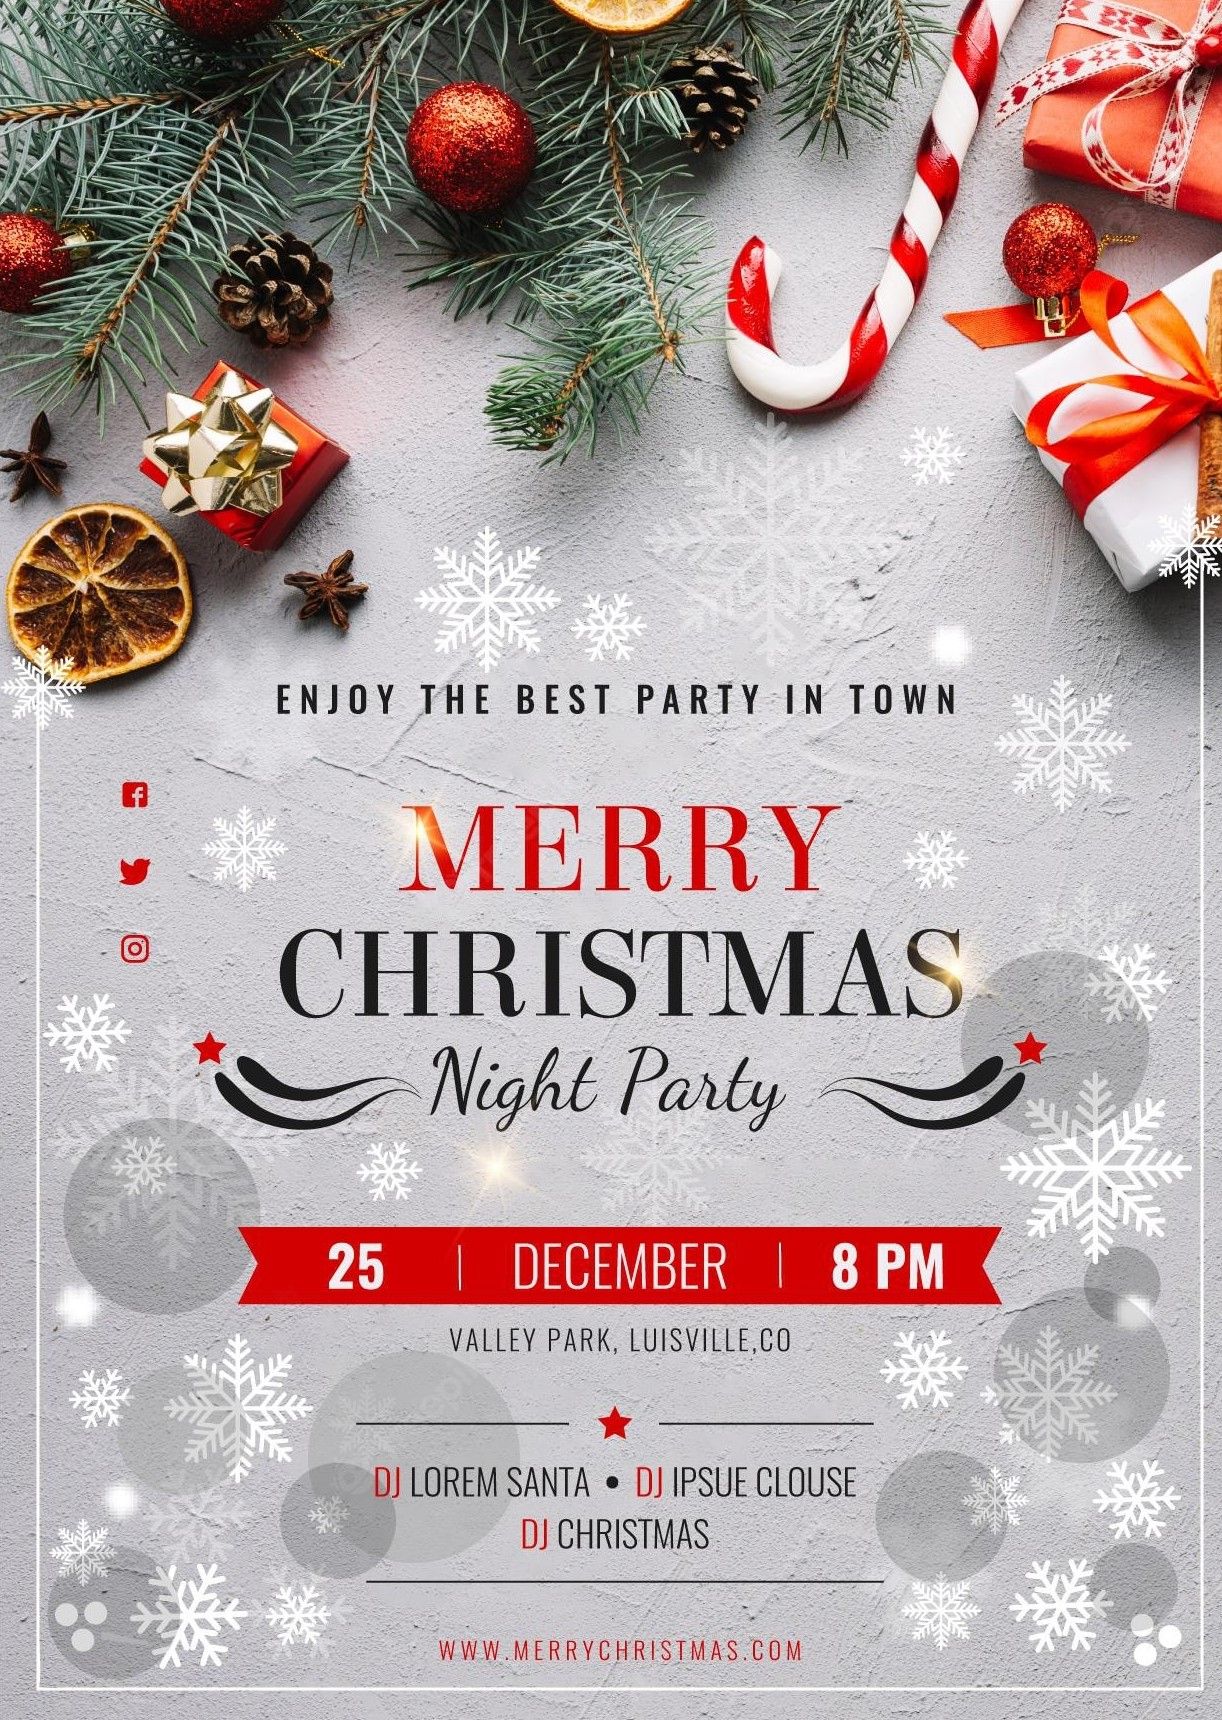 christmas-party-poster-template_23-2148714688.jpg